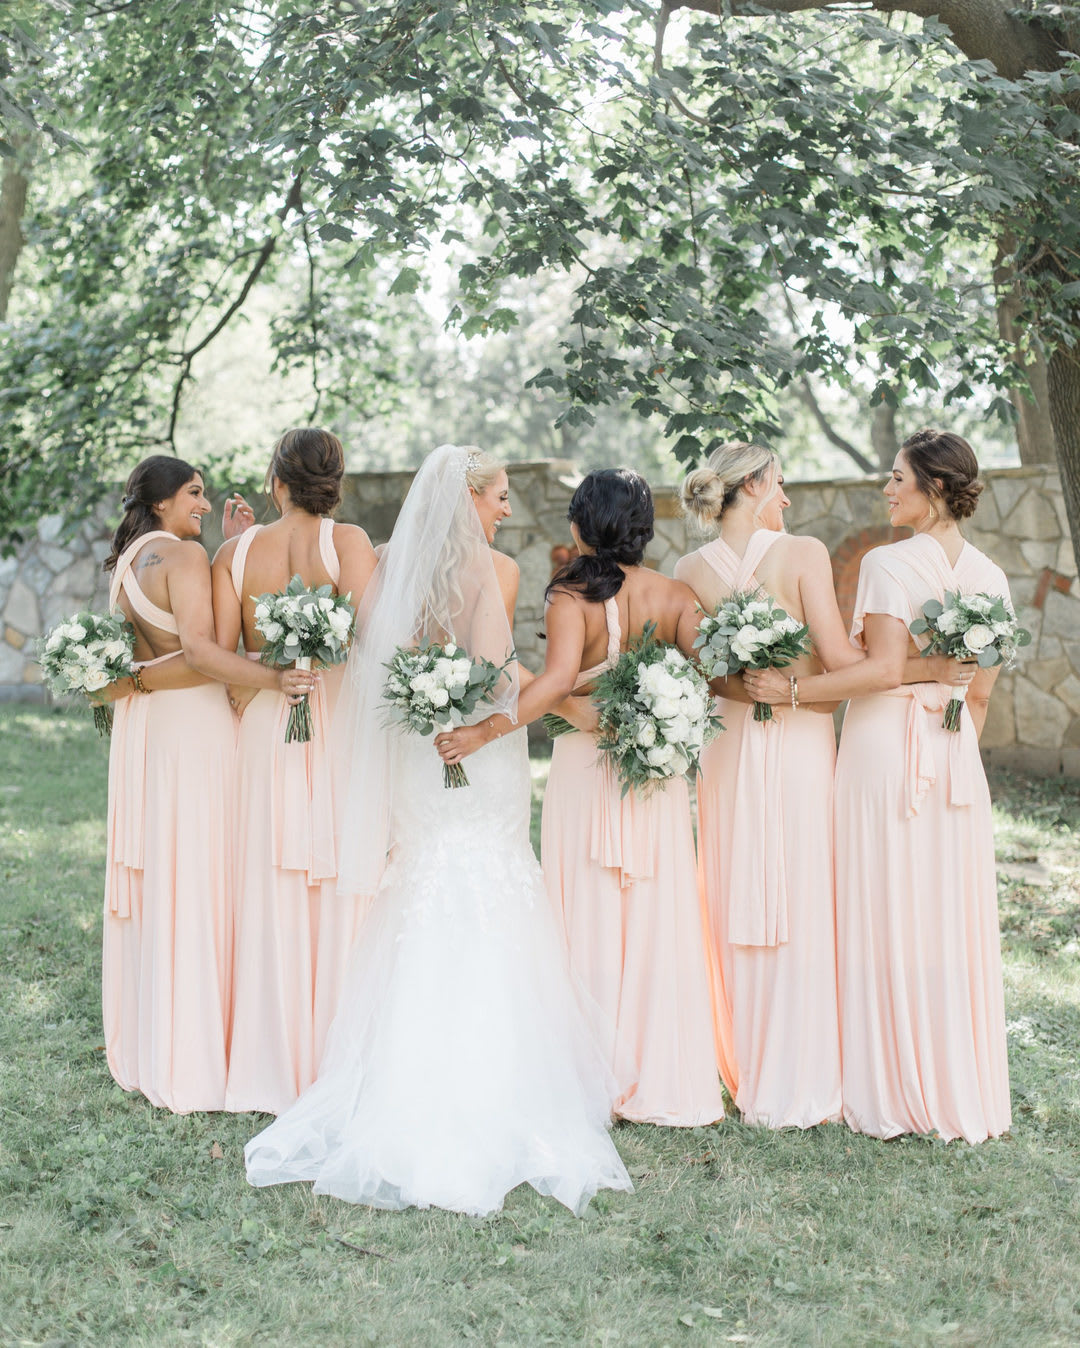 A Guide To Bridesmaid Gowns For Beginners